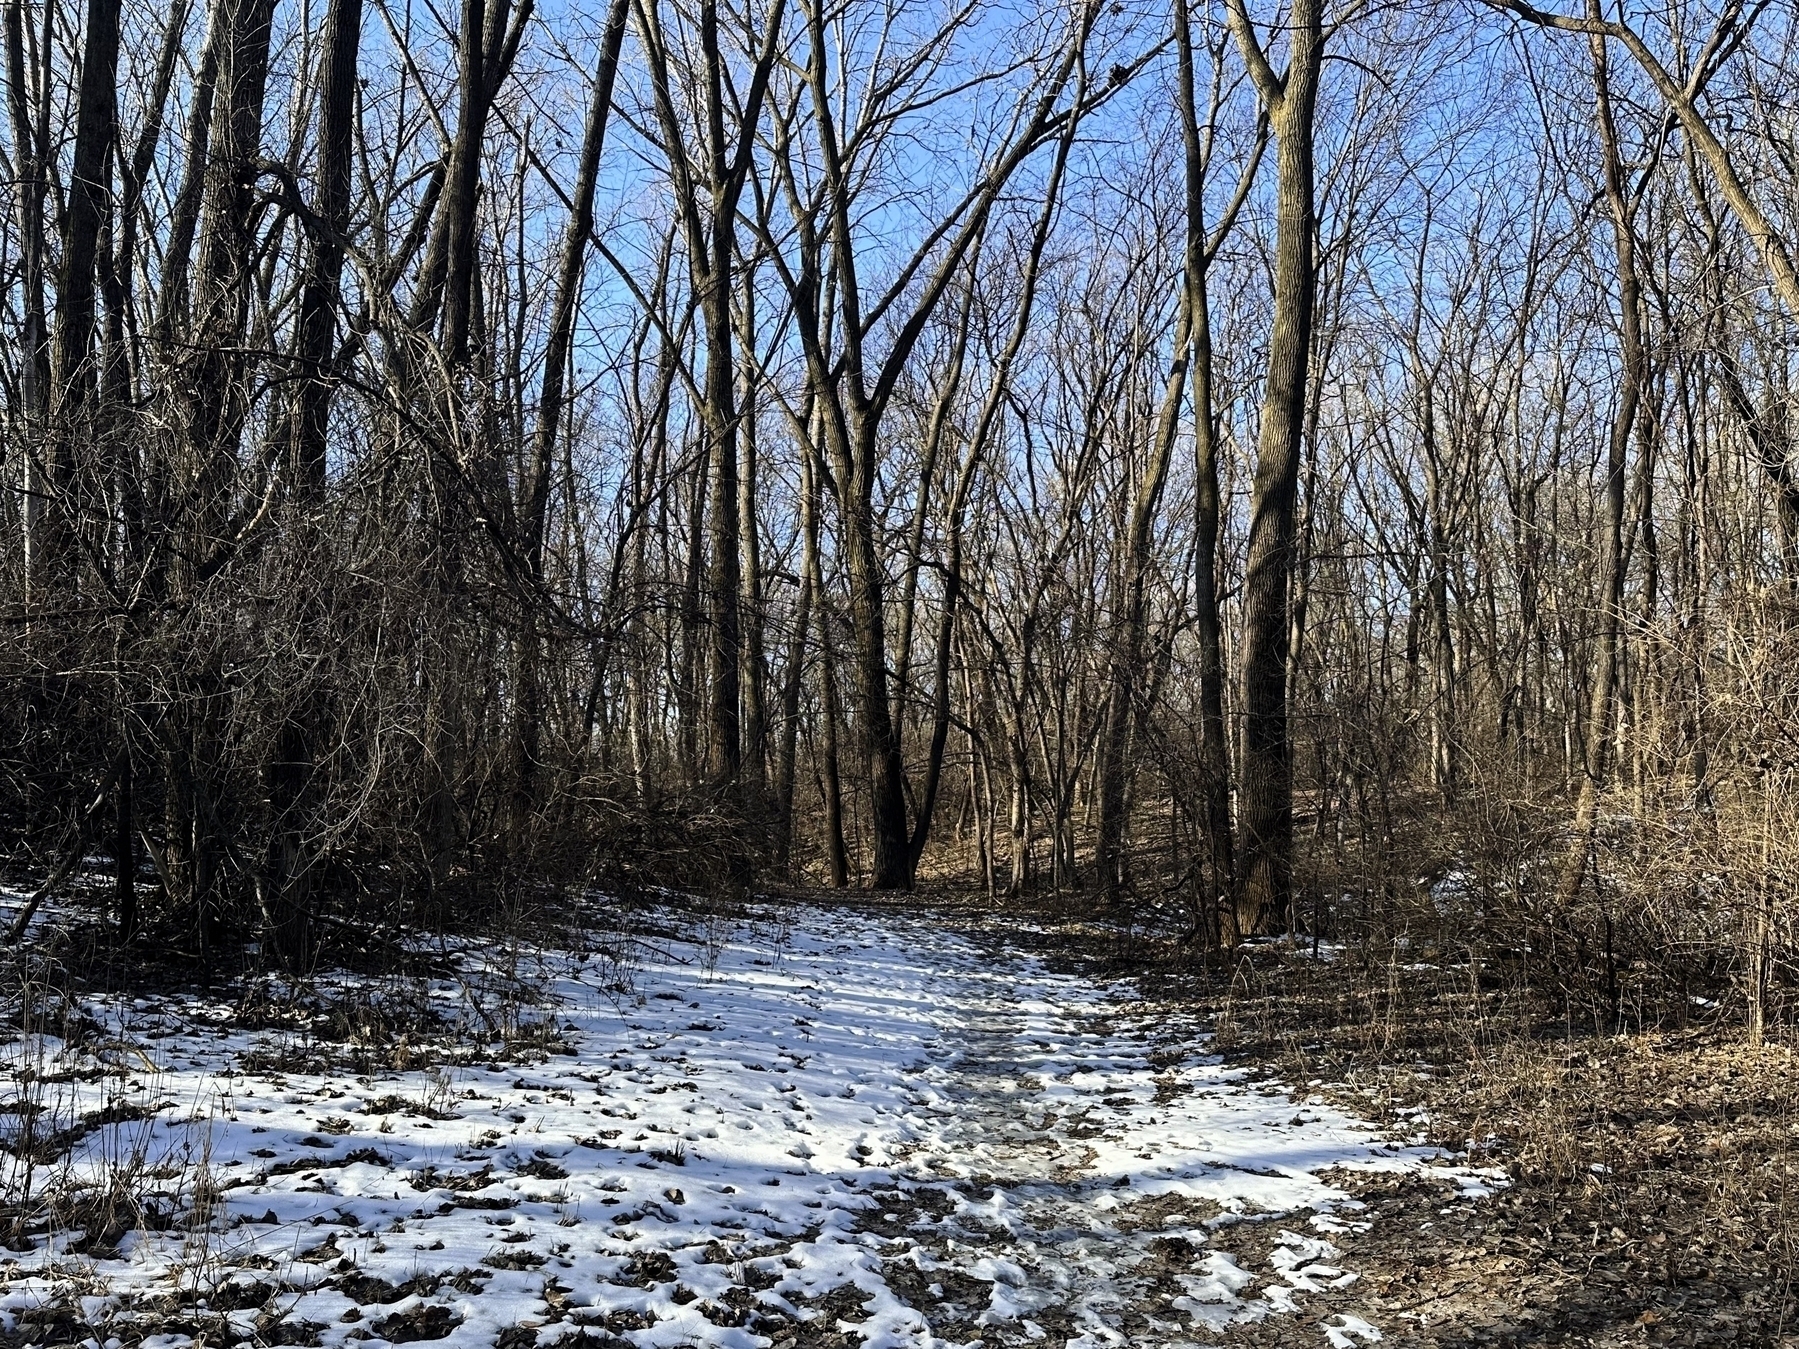 A snow-covered path winds through a leafless forest under a clear blue sky.